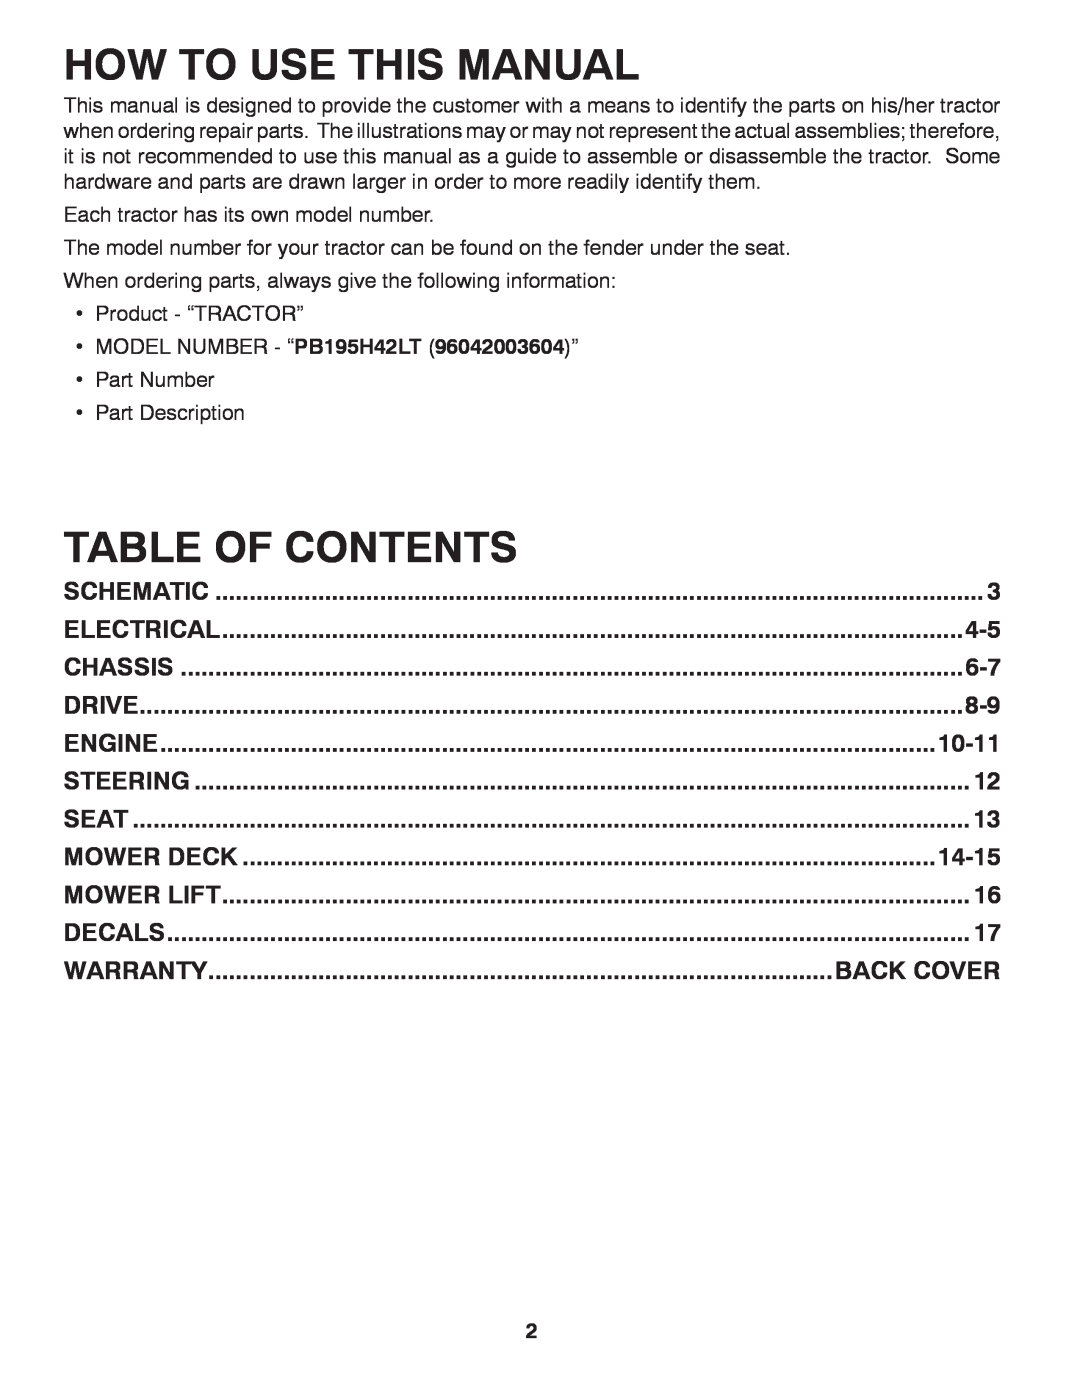 Poulan 96042003603, 426140 manual How To Use This Manual, Table Of Contents, 10-11, 14-15, Warranty 